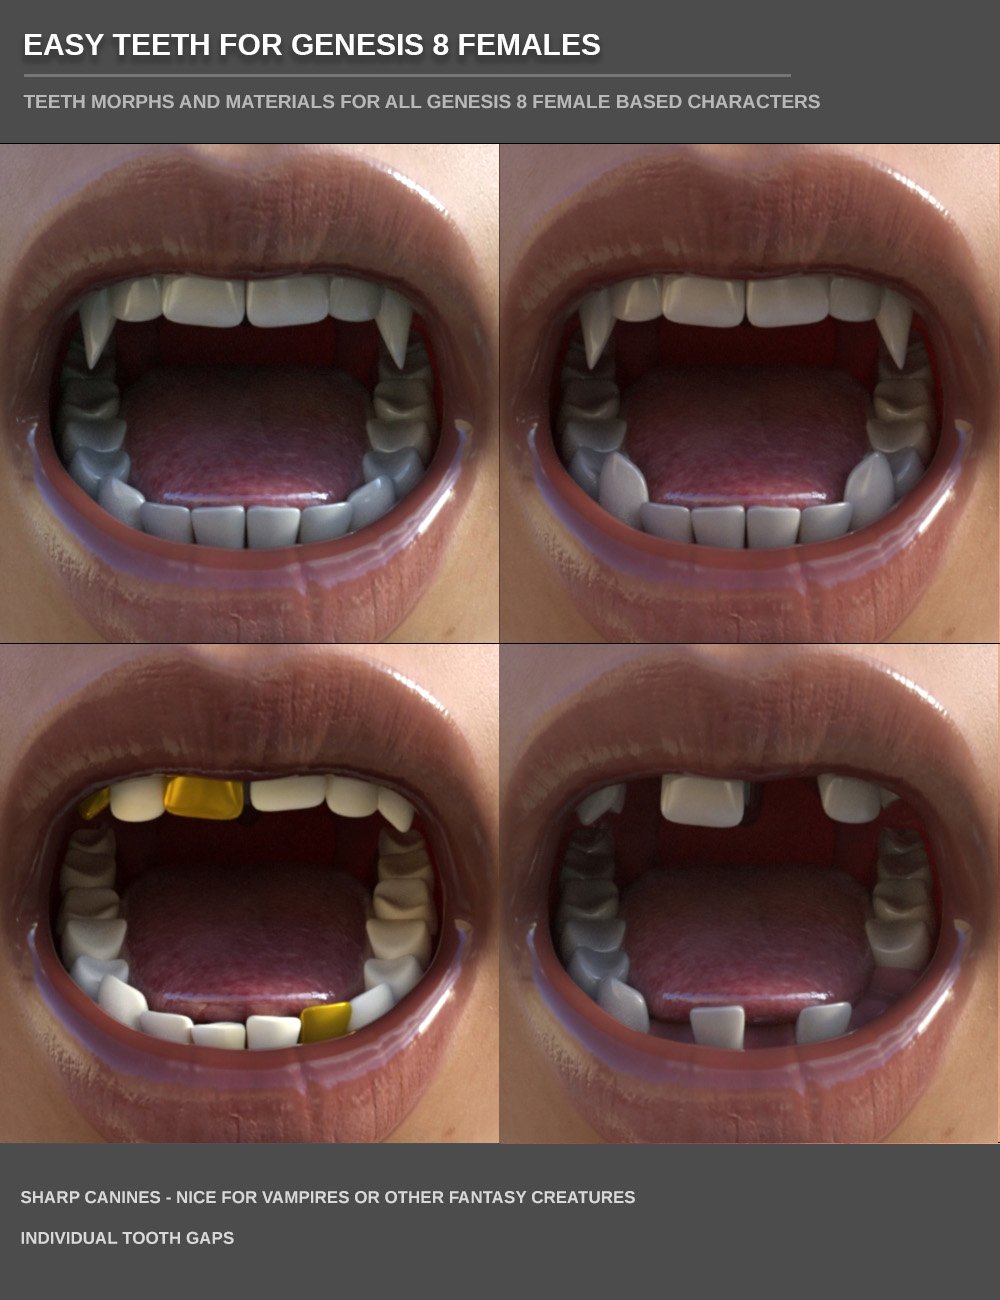 Easy Teeth for Genesis 8 Female(s) and Merchant Resource by: SF-Design, 3D Models by Daz 3D